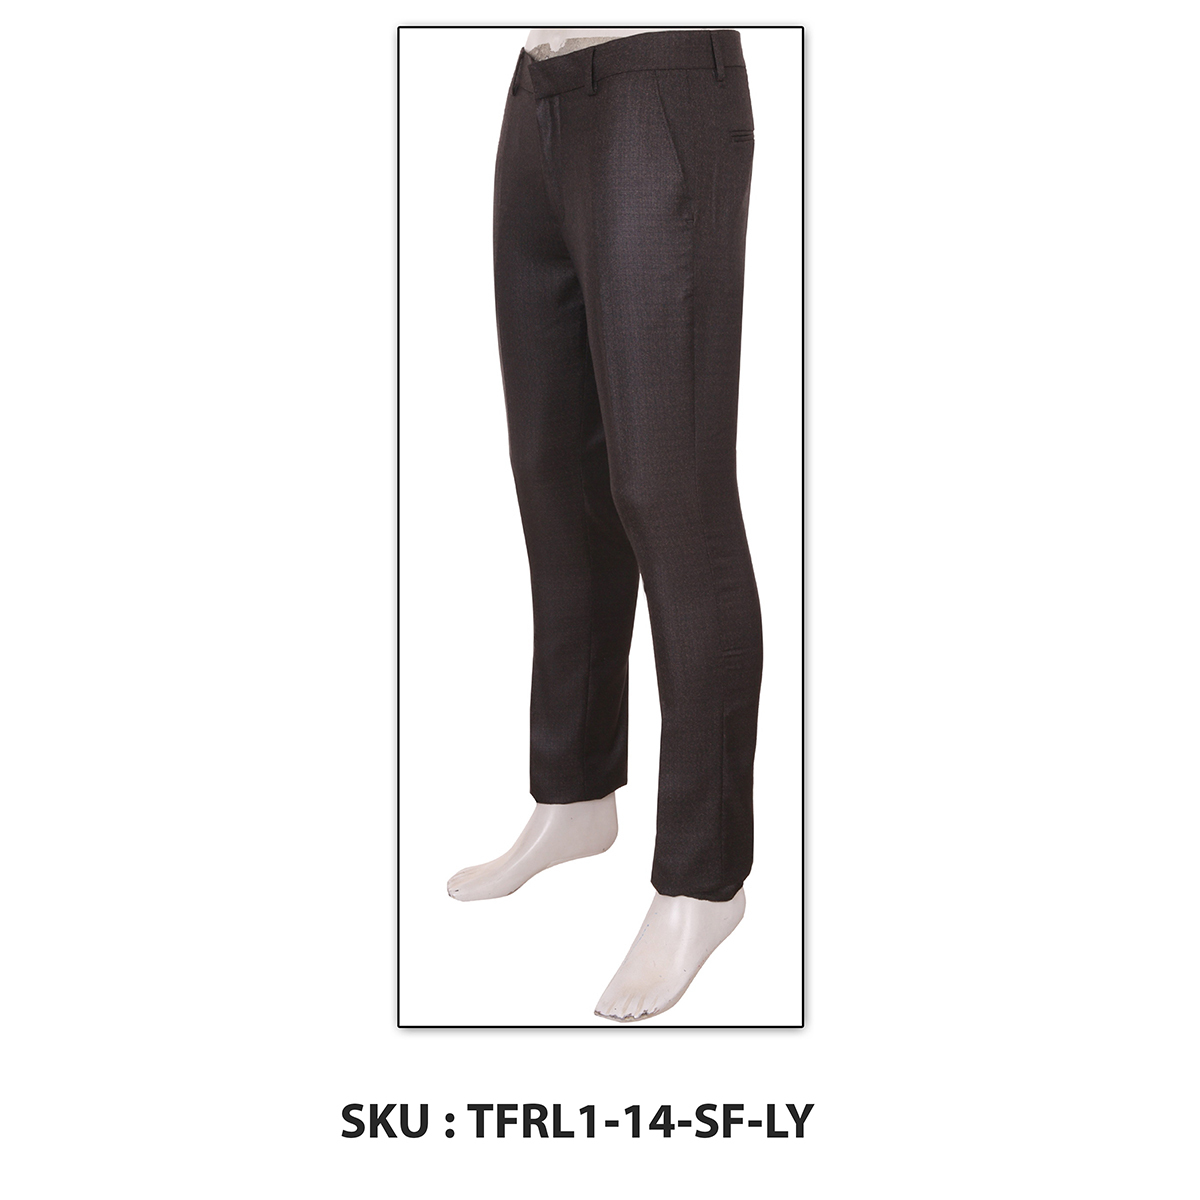 Classic Polo Mens Trousers Tfrl1-14-Sf-Ly Brown 36